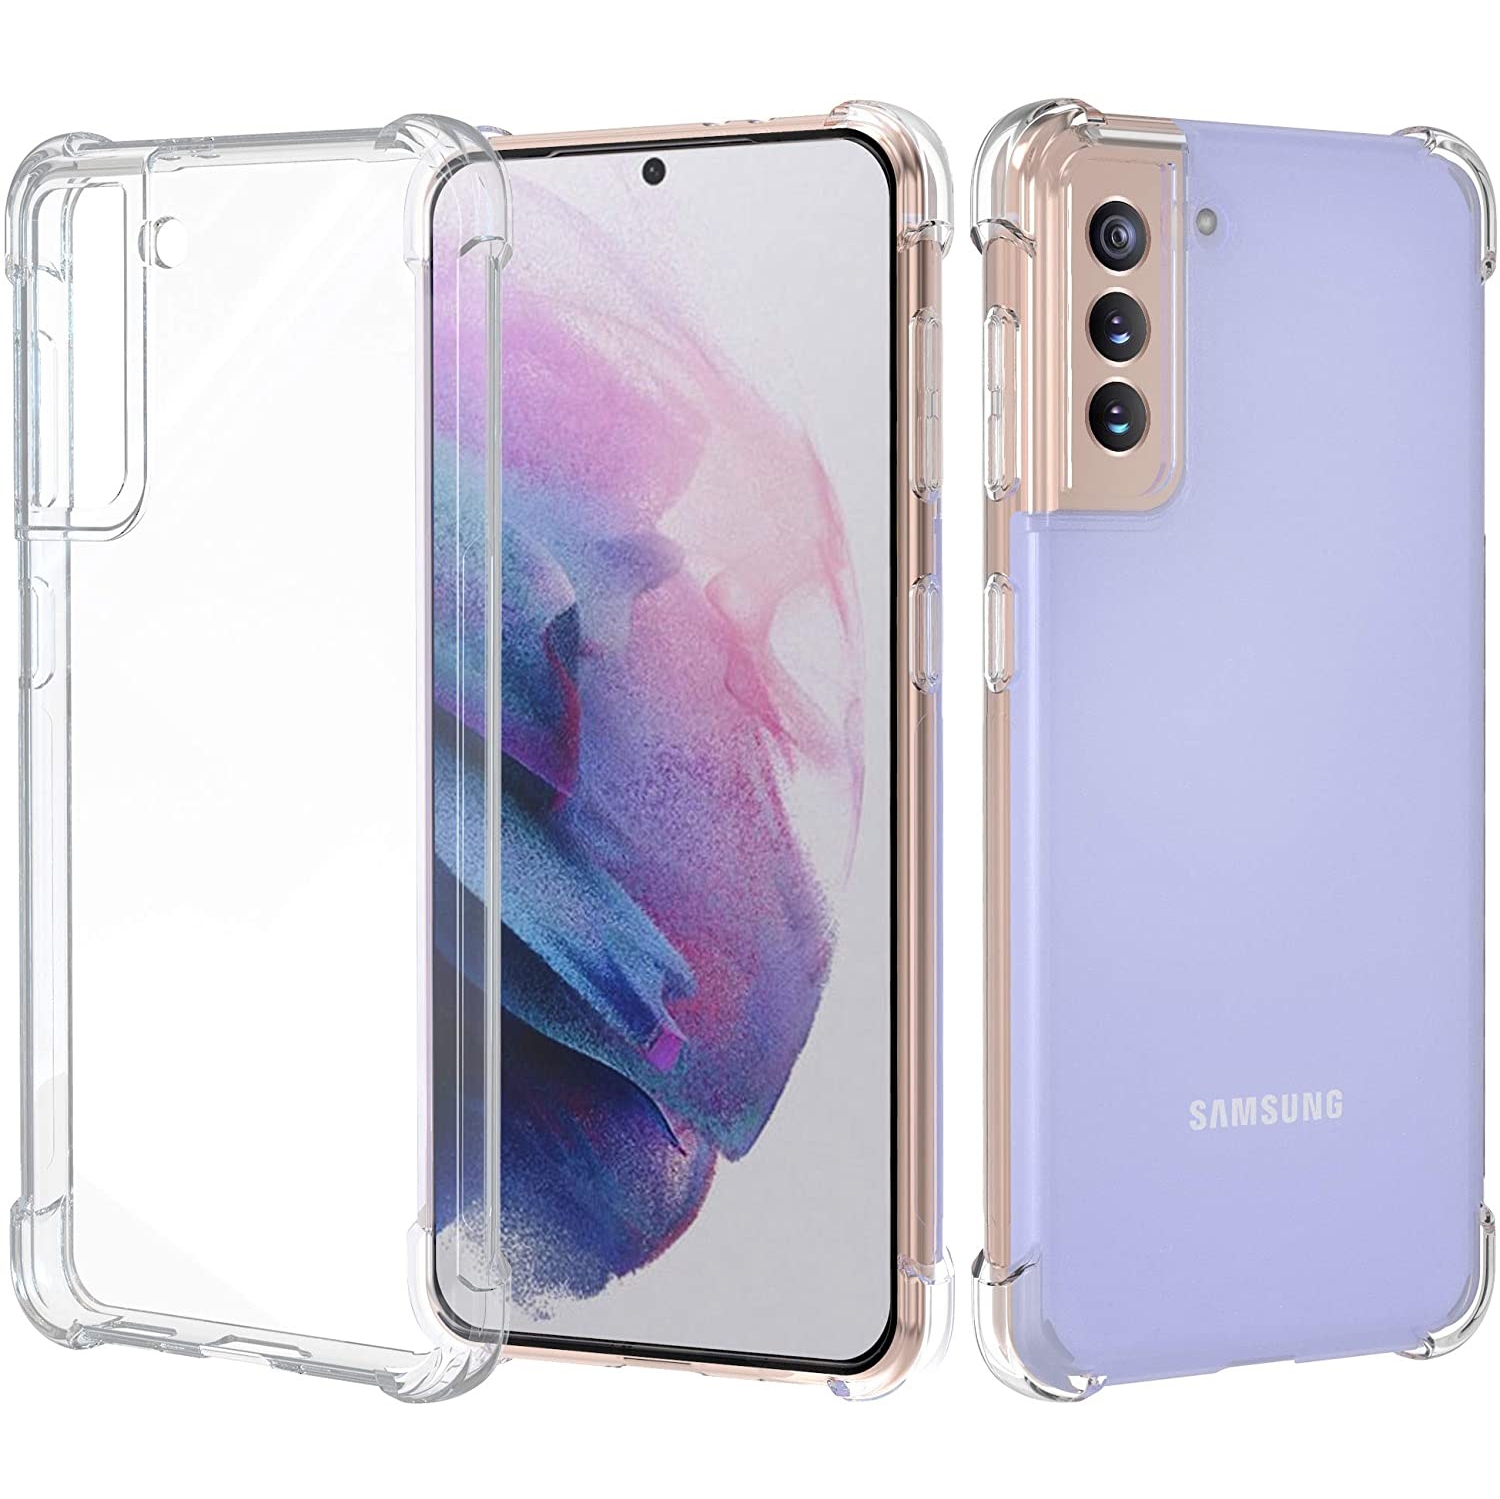 TopSave Extra Corner Bumper Soft Gel TPU Case For Samsung S21 Plus, Clear